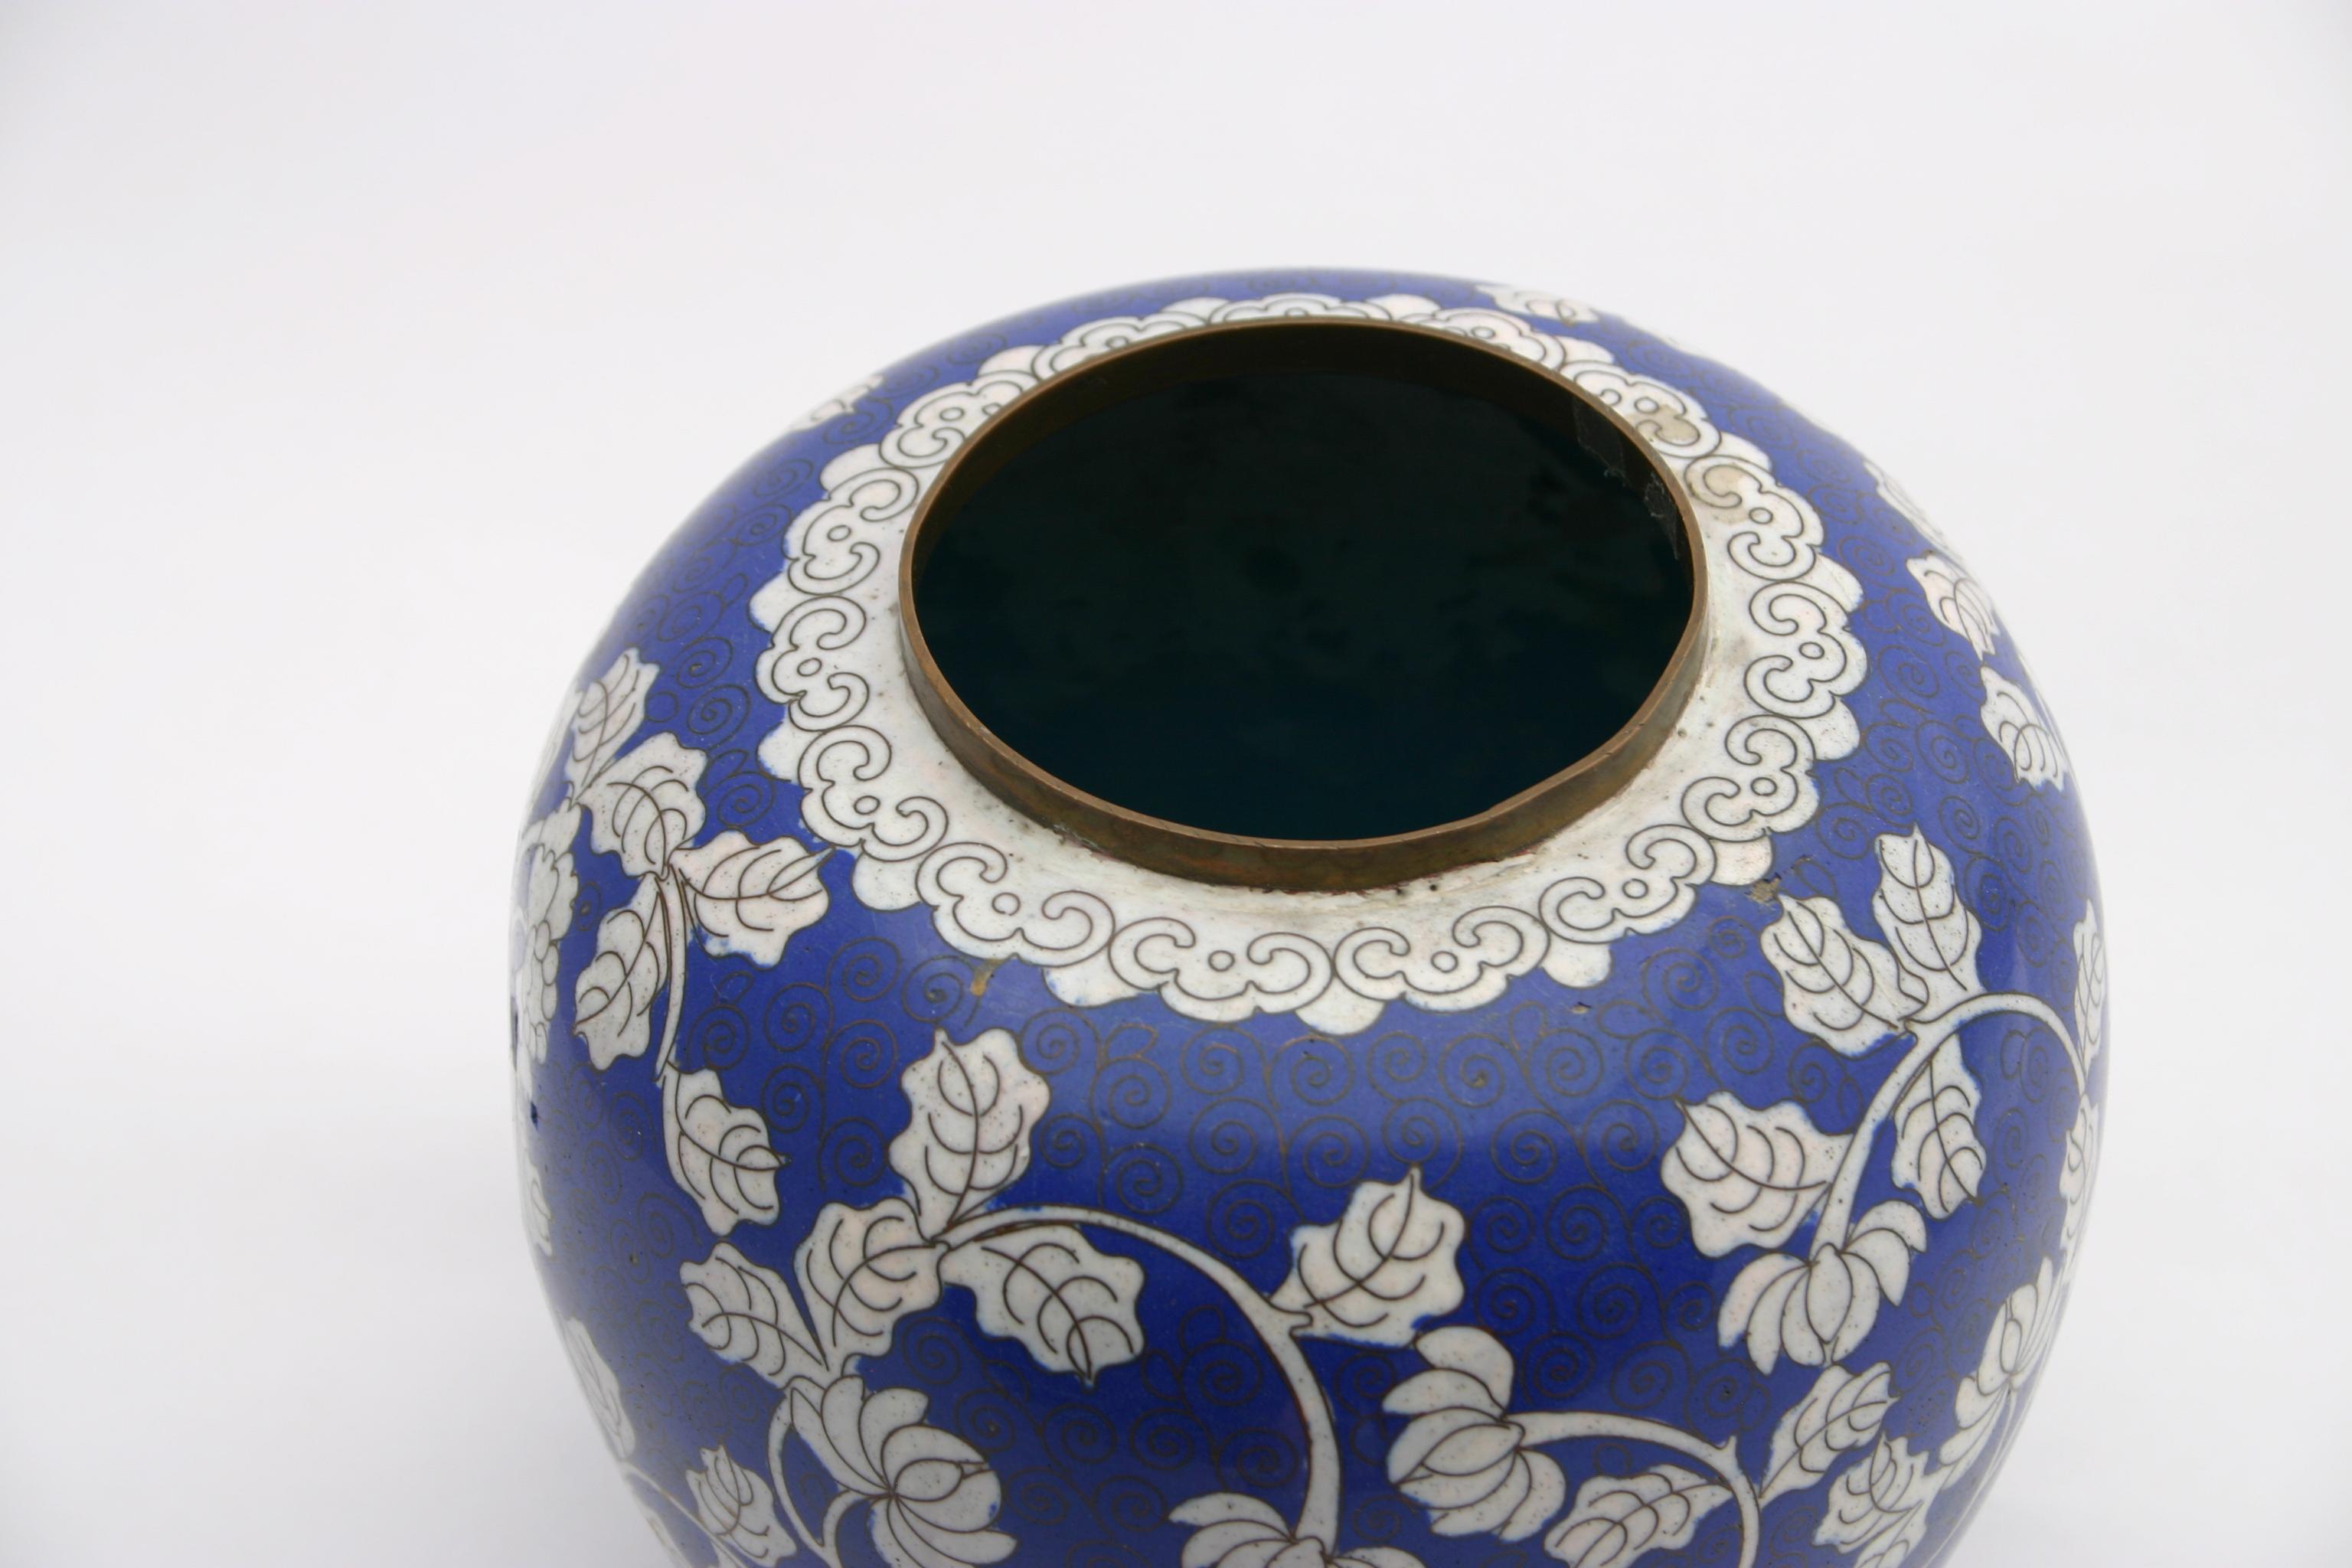 Porcelain Antique Blue and White Chinese Cloisonné Chrysanthemum Ginger Jar